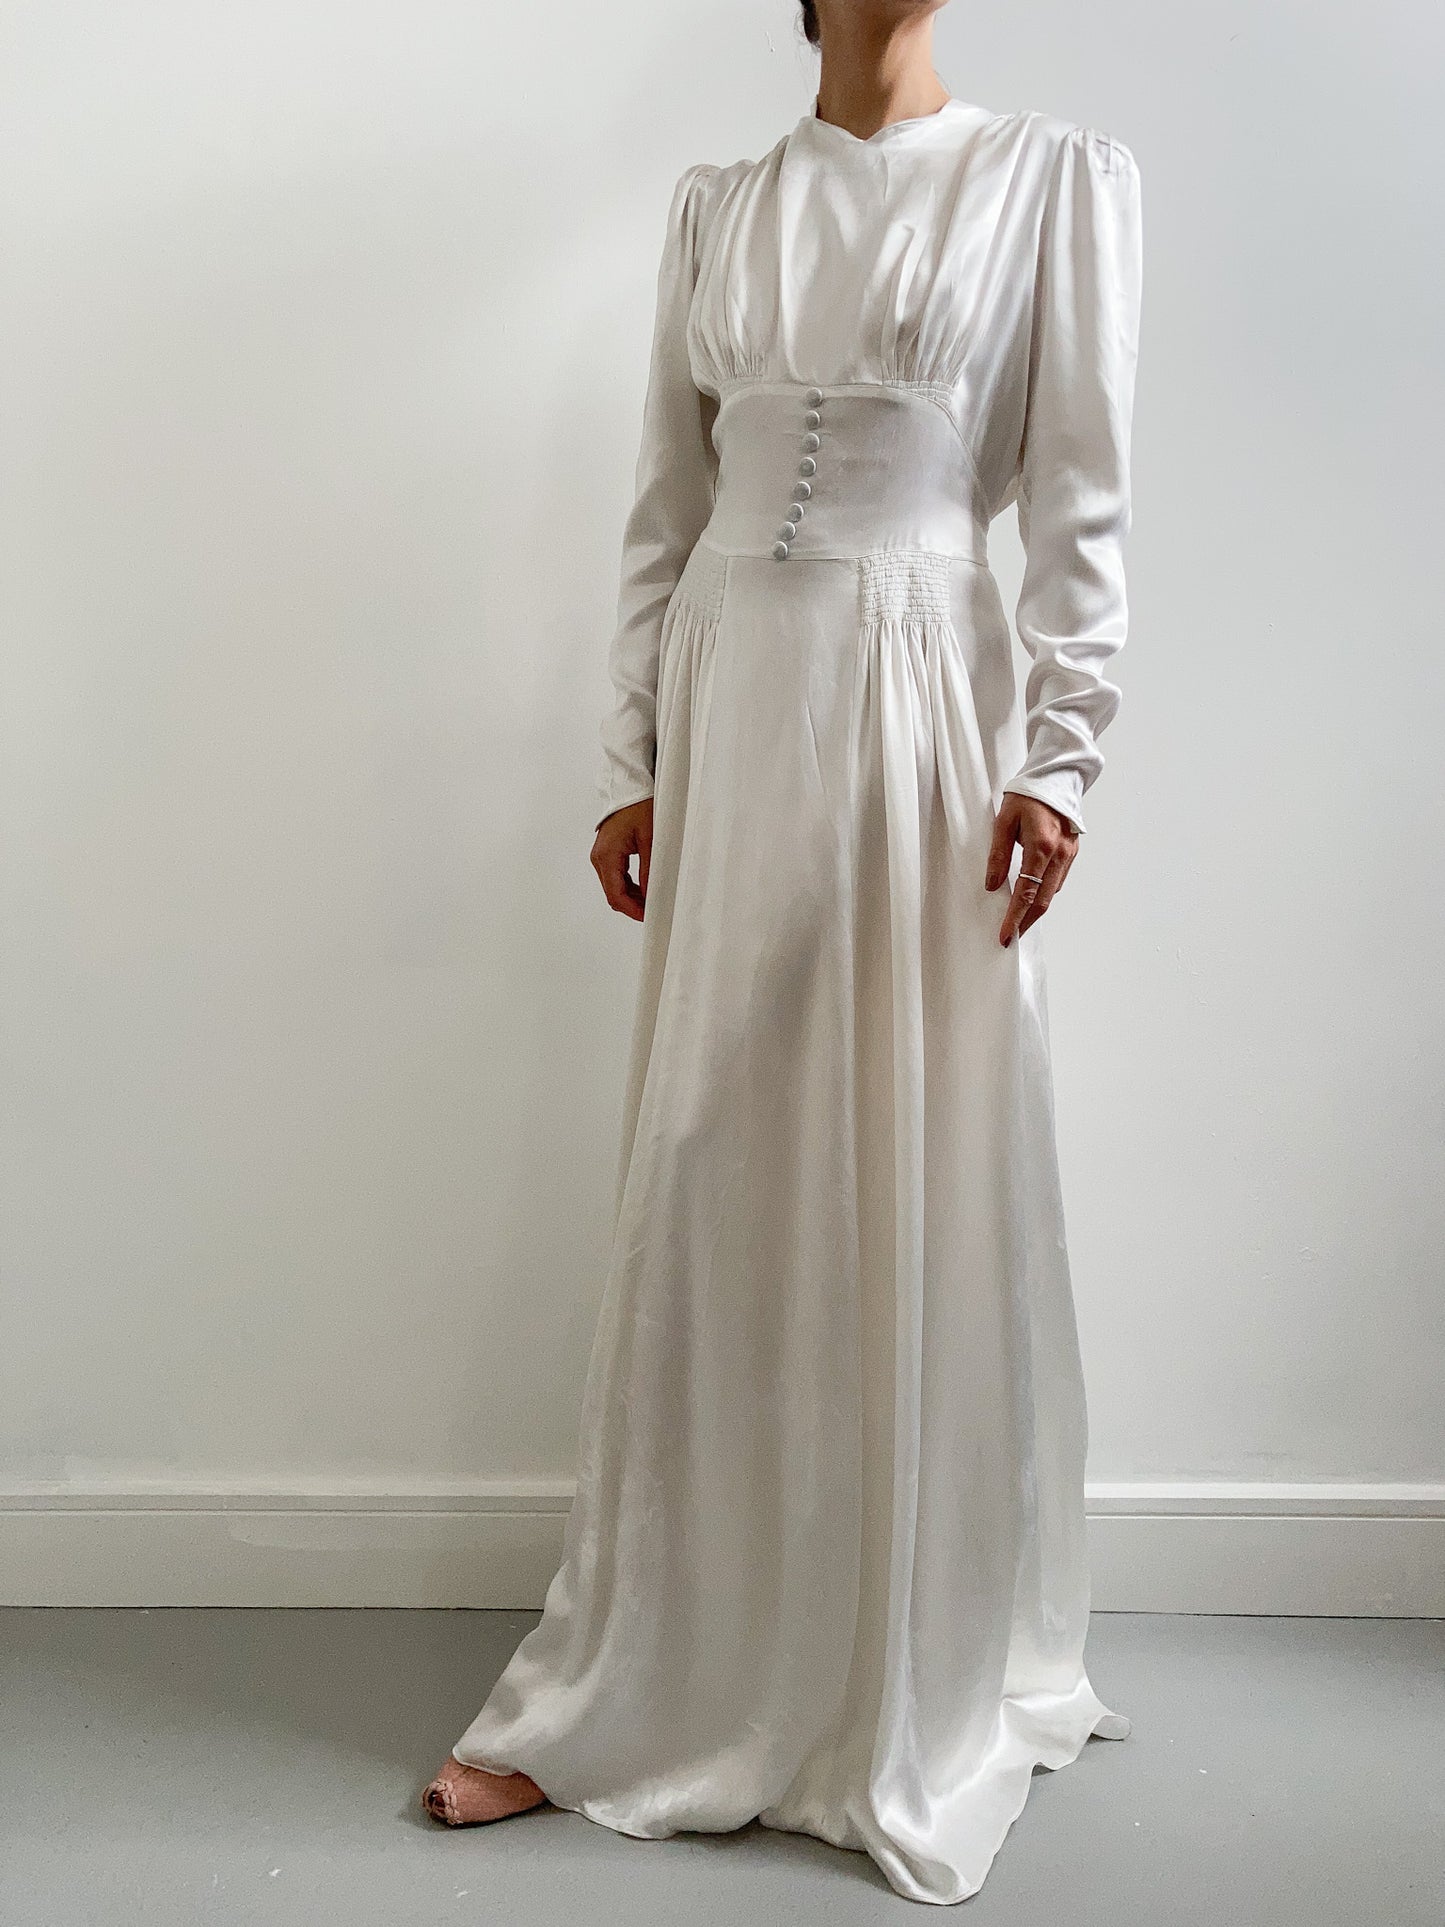 1940s Ivory Satin Wedding Dress with Buttons